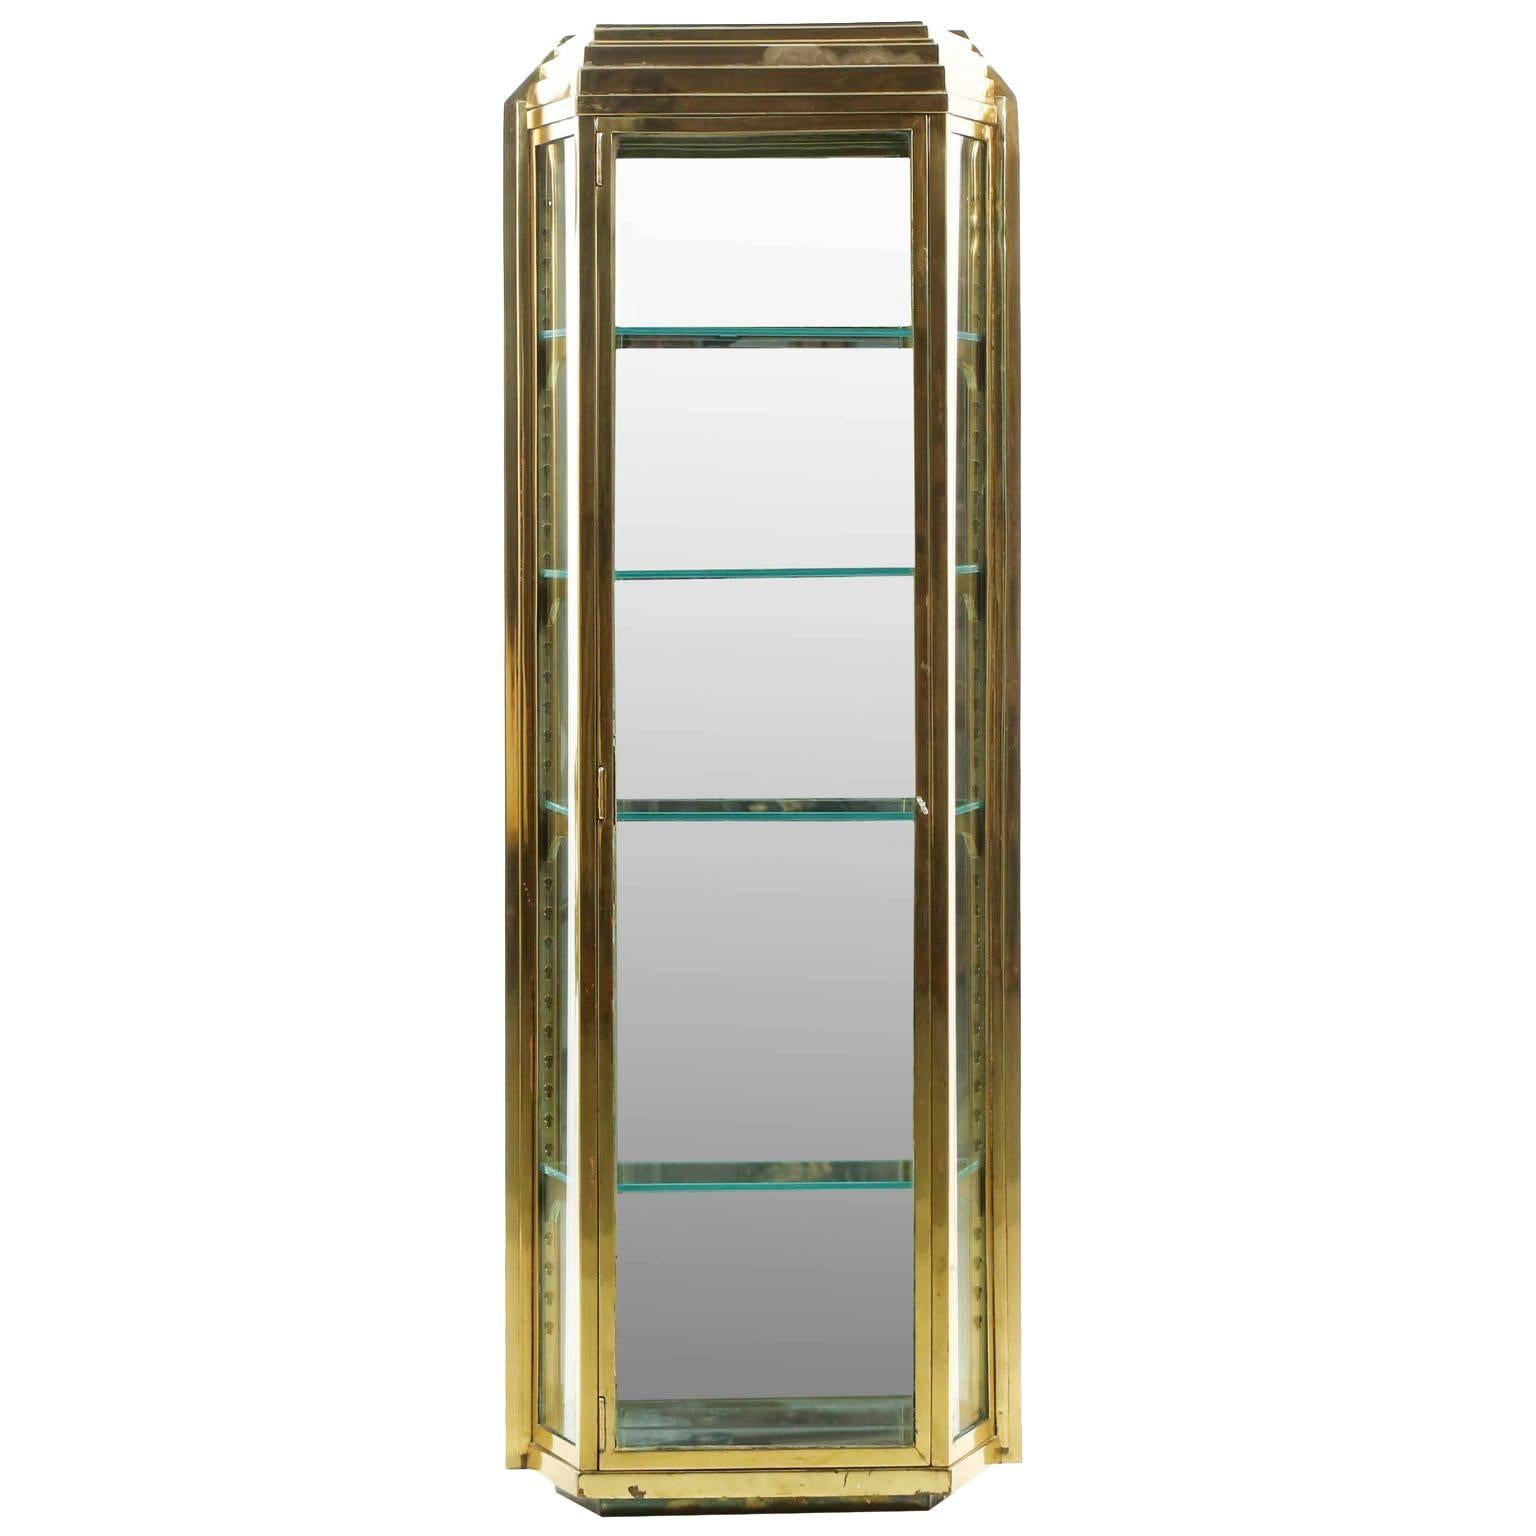 Art Deco Stepped Brass Wall Hanging Vitrine Display Cabinet, 20th Century